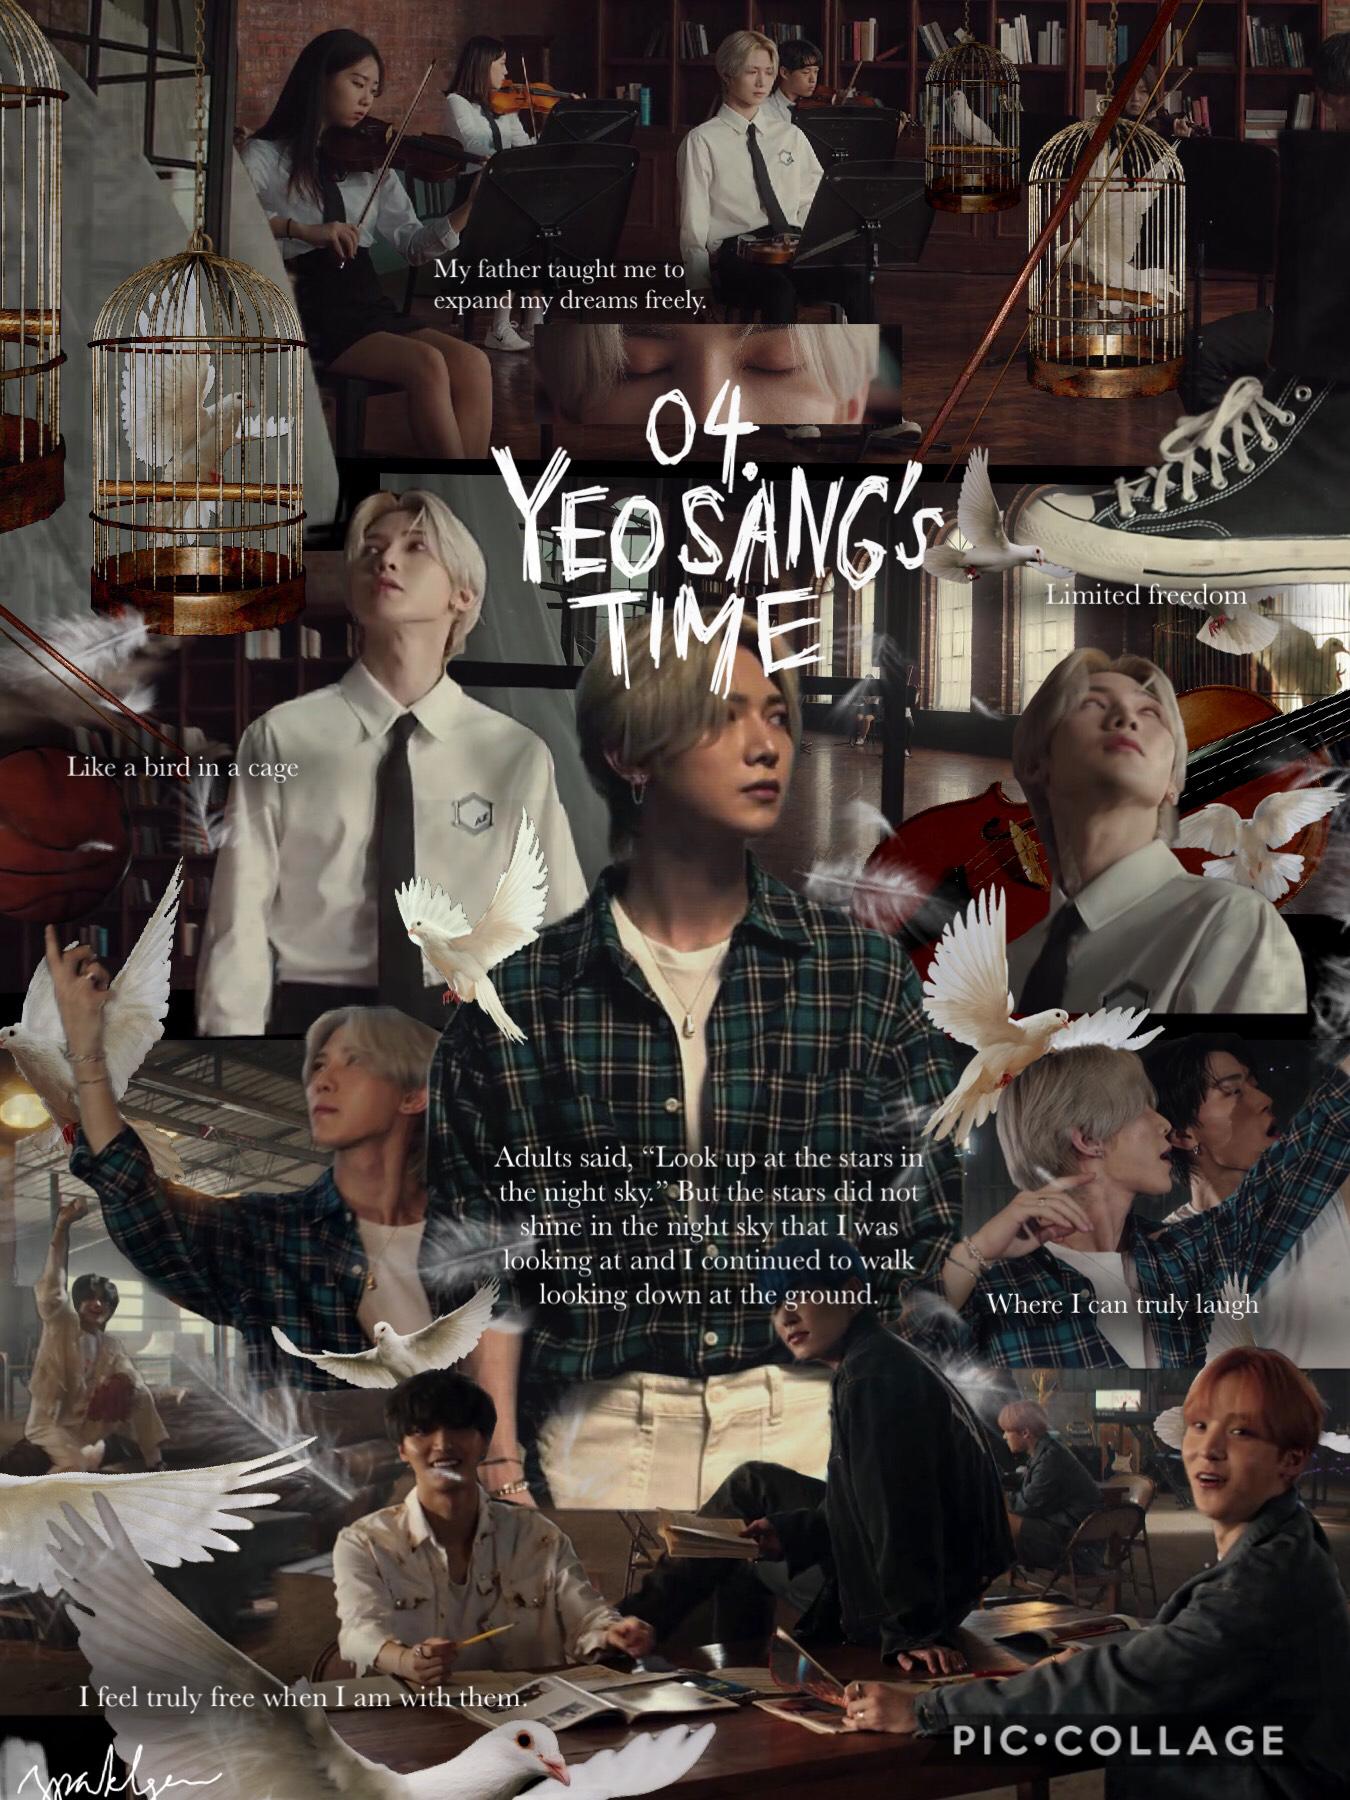 [5/10] 04. “Yeosang’s Time” |YS talks about “time” & “adults” so maybe he doesn’t want to grow up (peter pan/lost boys reference) & give into society’s standards of success/maturity (the violins) because it gives him limited freedom (birdcage)